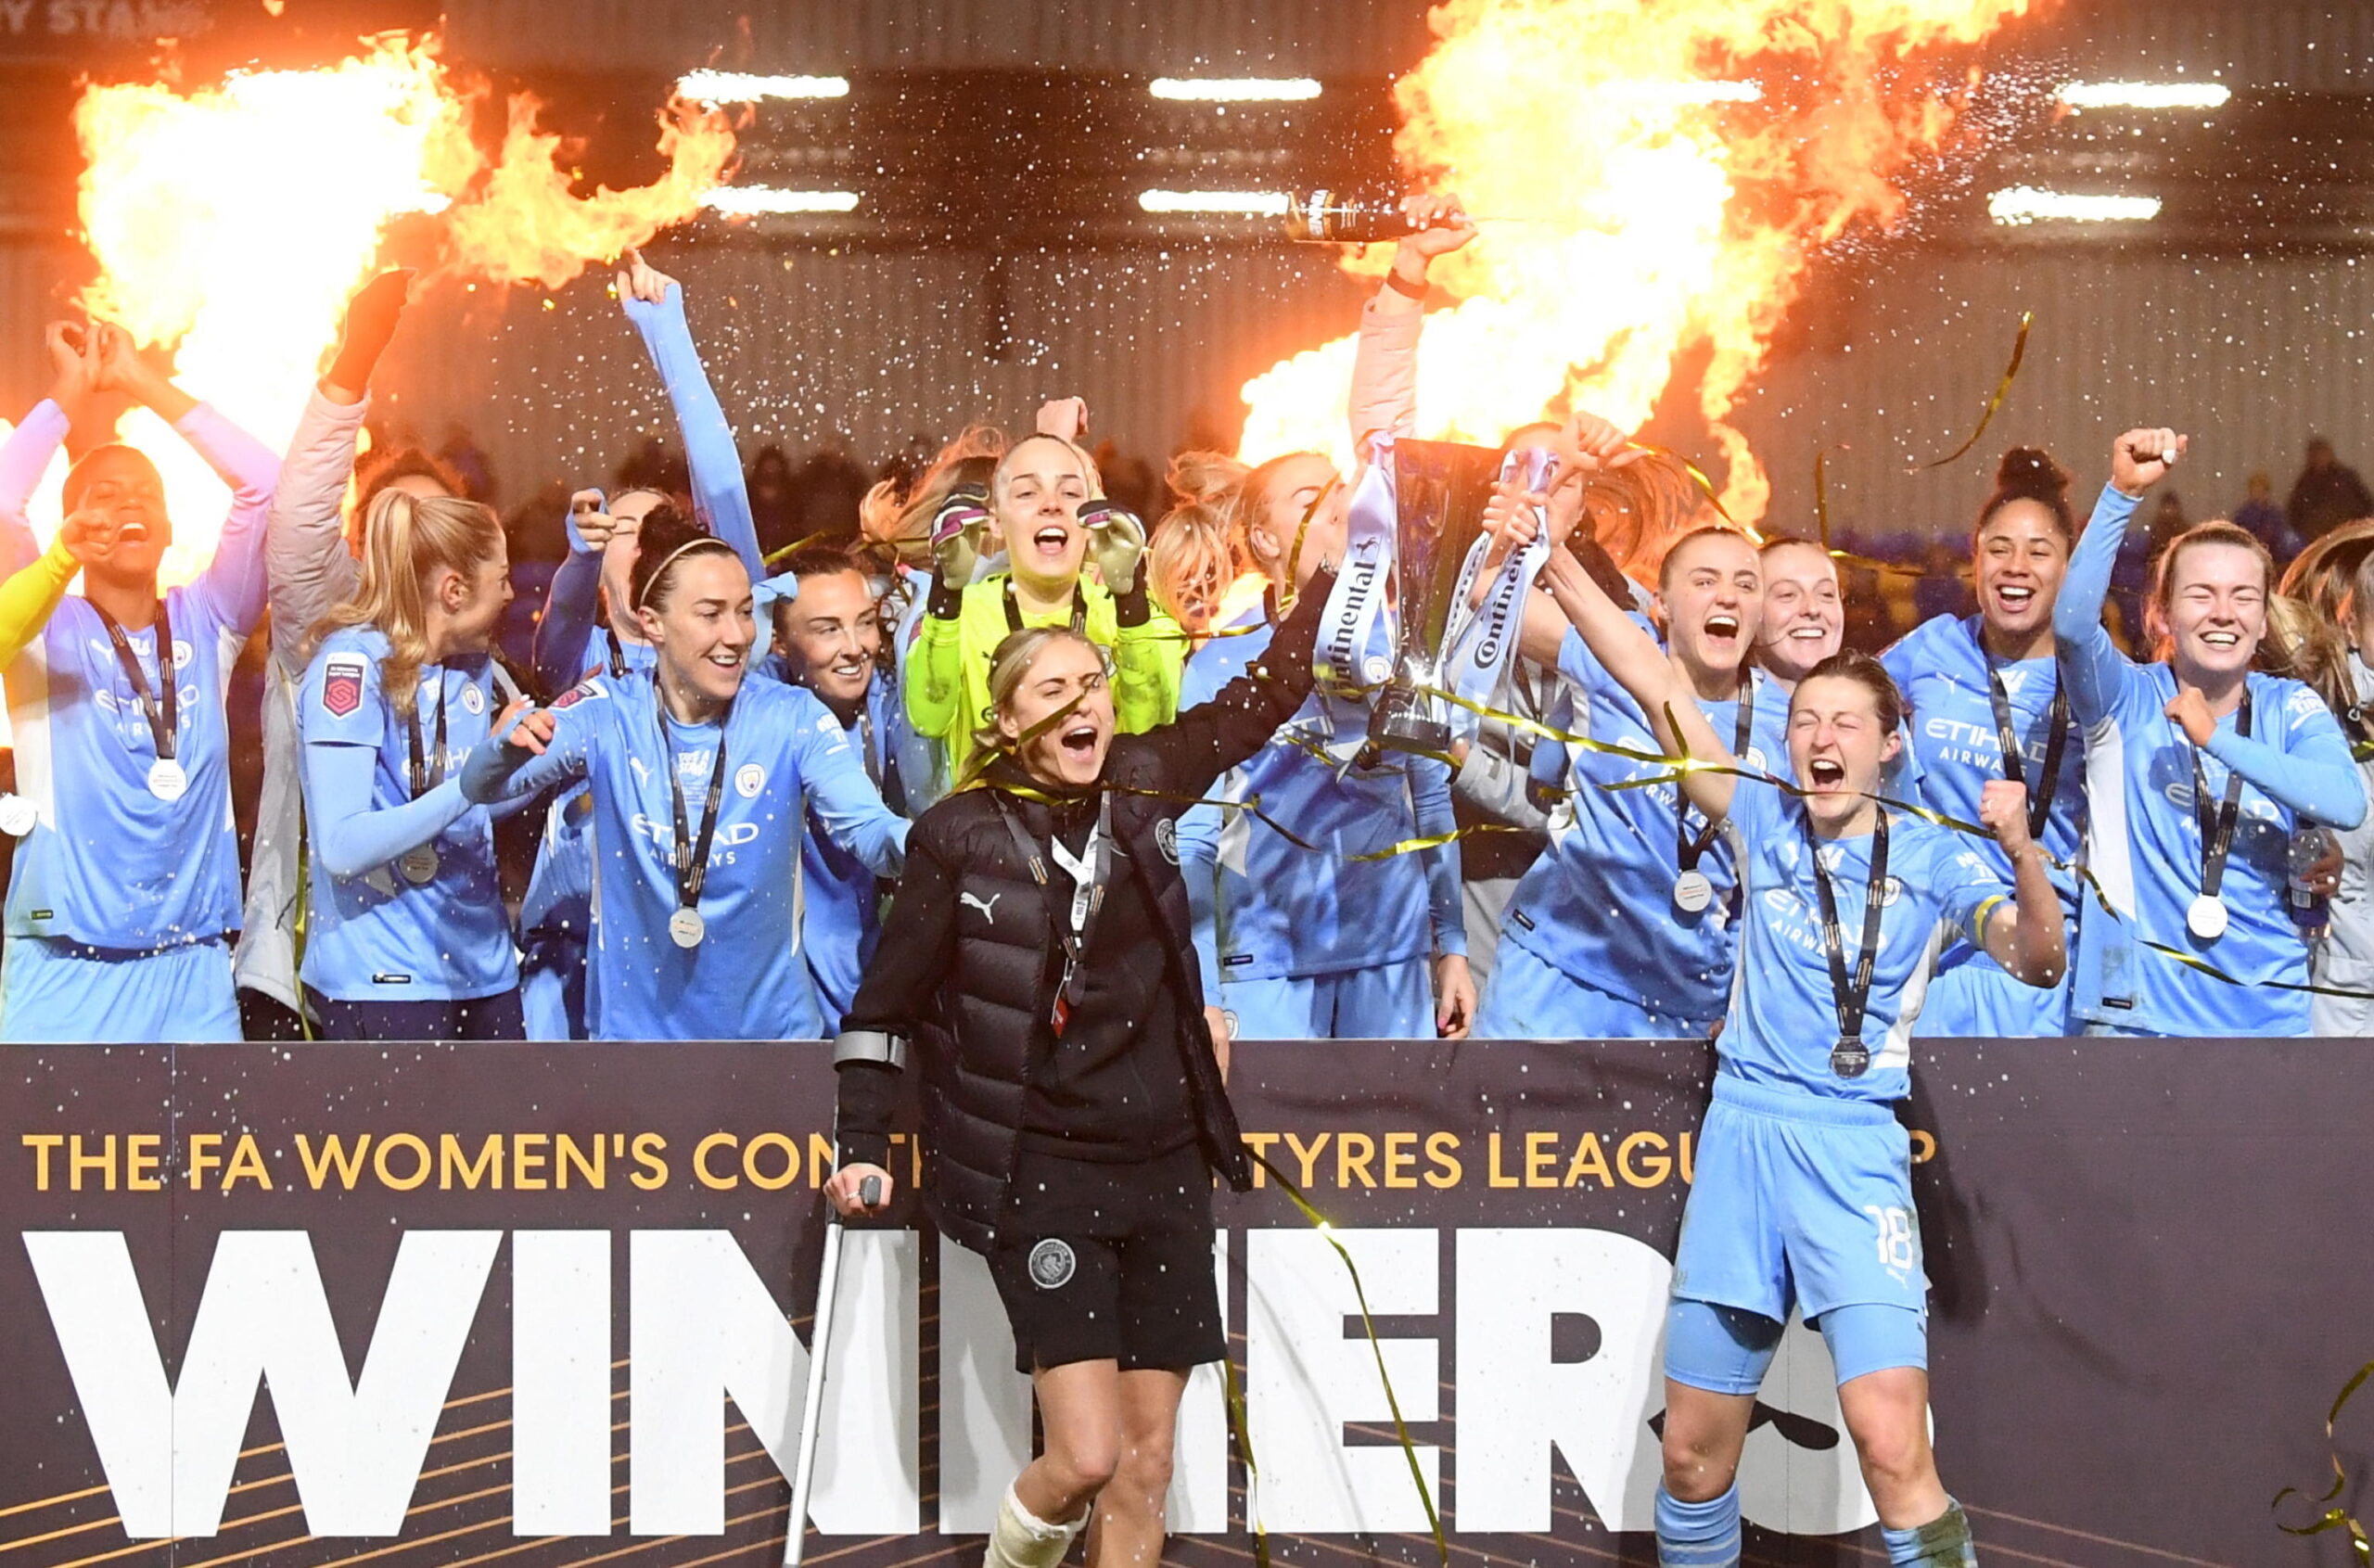 epa09804453 Manchester City WFC's players celebrate with the trophy after winning the FA Women's League Cup Final between Chelsea FC Women's and Manchester City WFC at the Cherry Reds Record Stadium in London Britain, 05 March 2022.  EPA/NEIL HALL EDITORIAL USE ONLY. No use with unauthorized audio, video, data, fixture lists, club/league logos or 'live' services. Online in-match use limited to 120 images, no video emulation. No use in betting, games or single club/league/player publications.